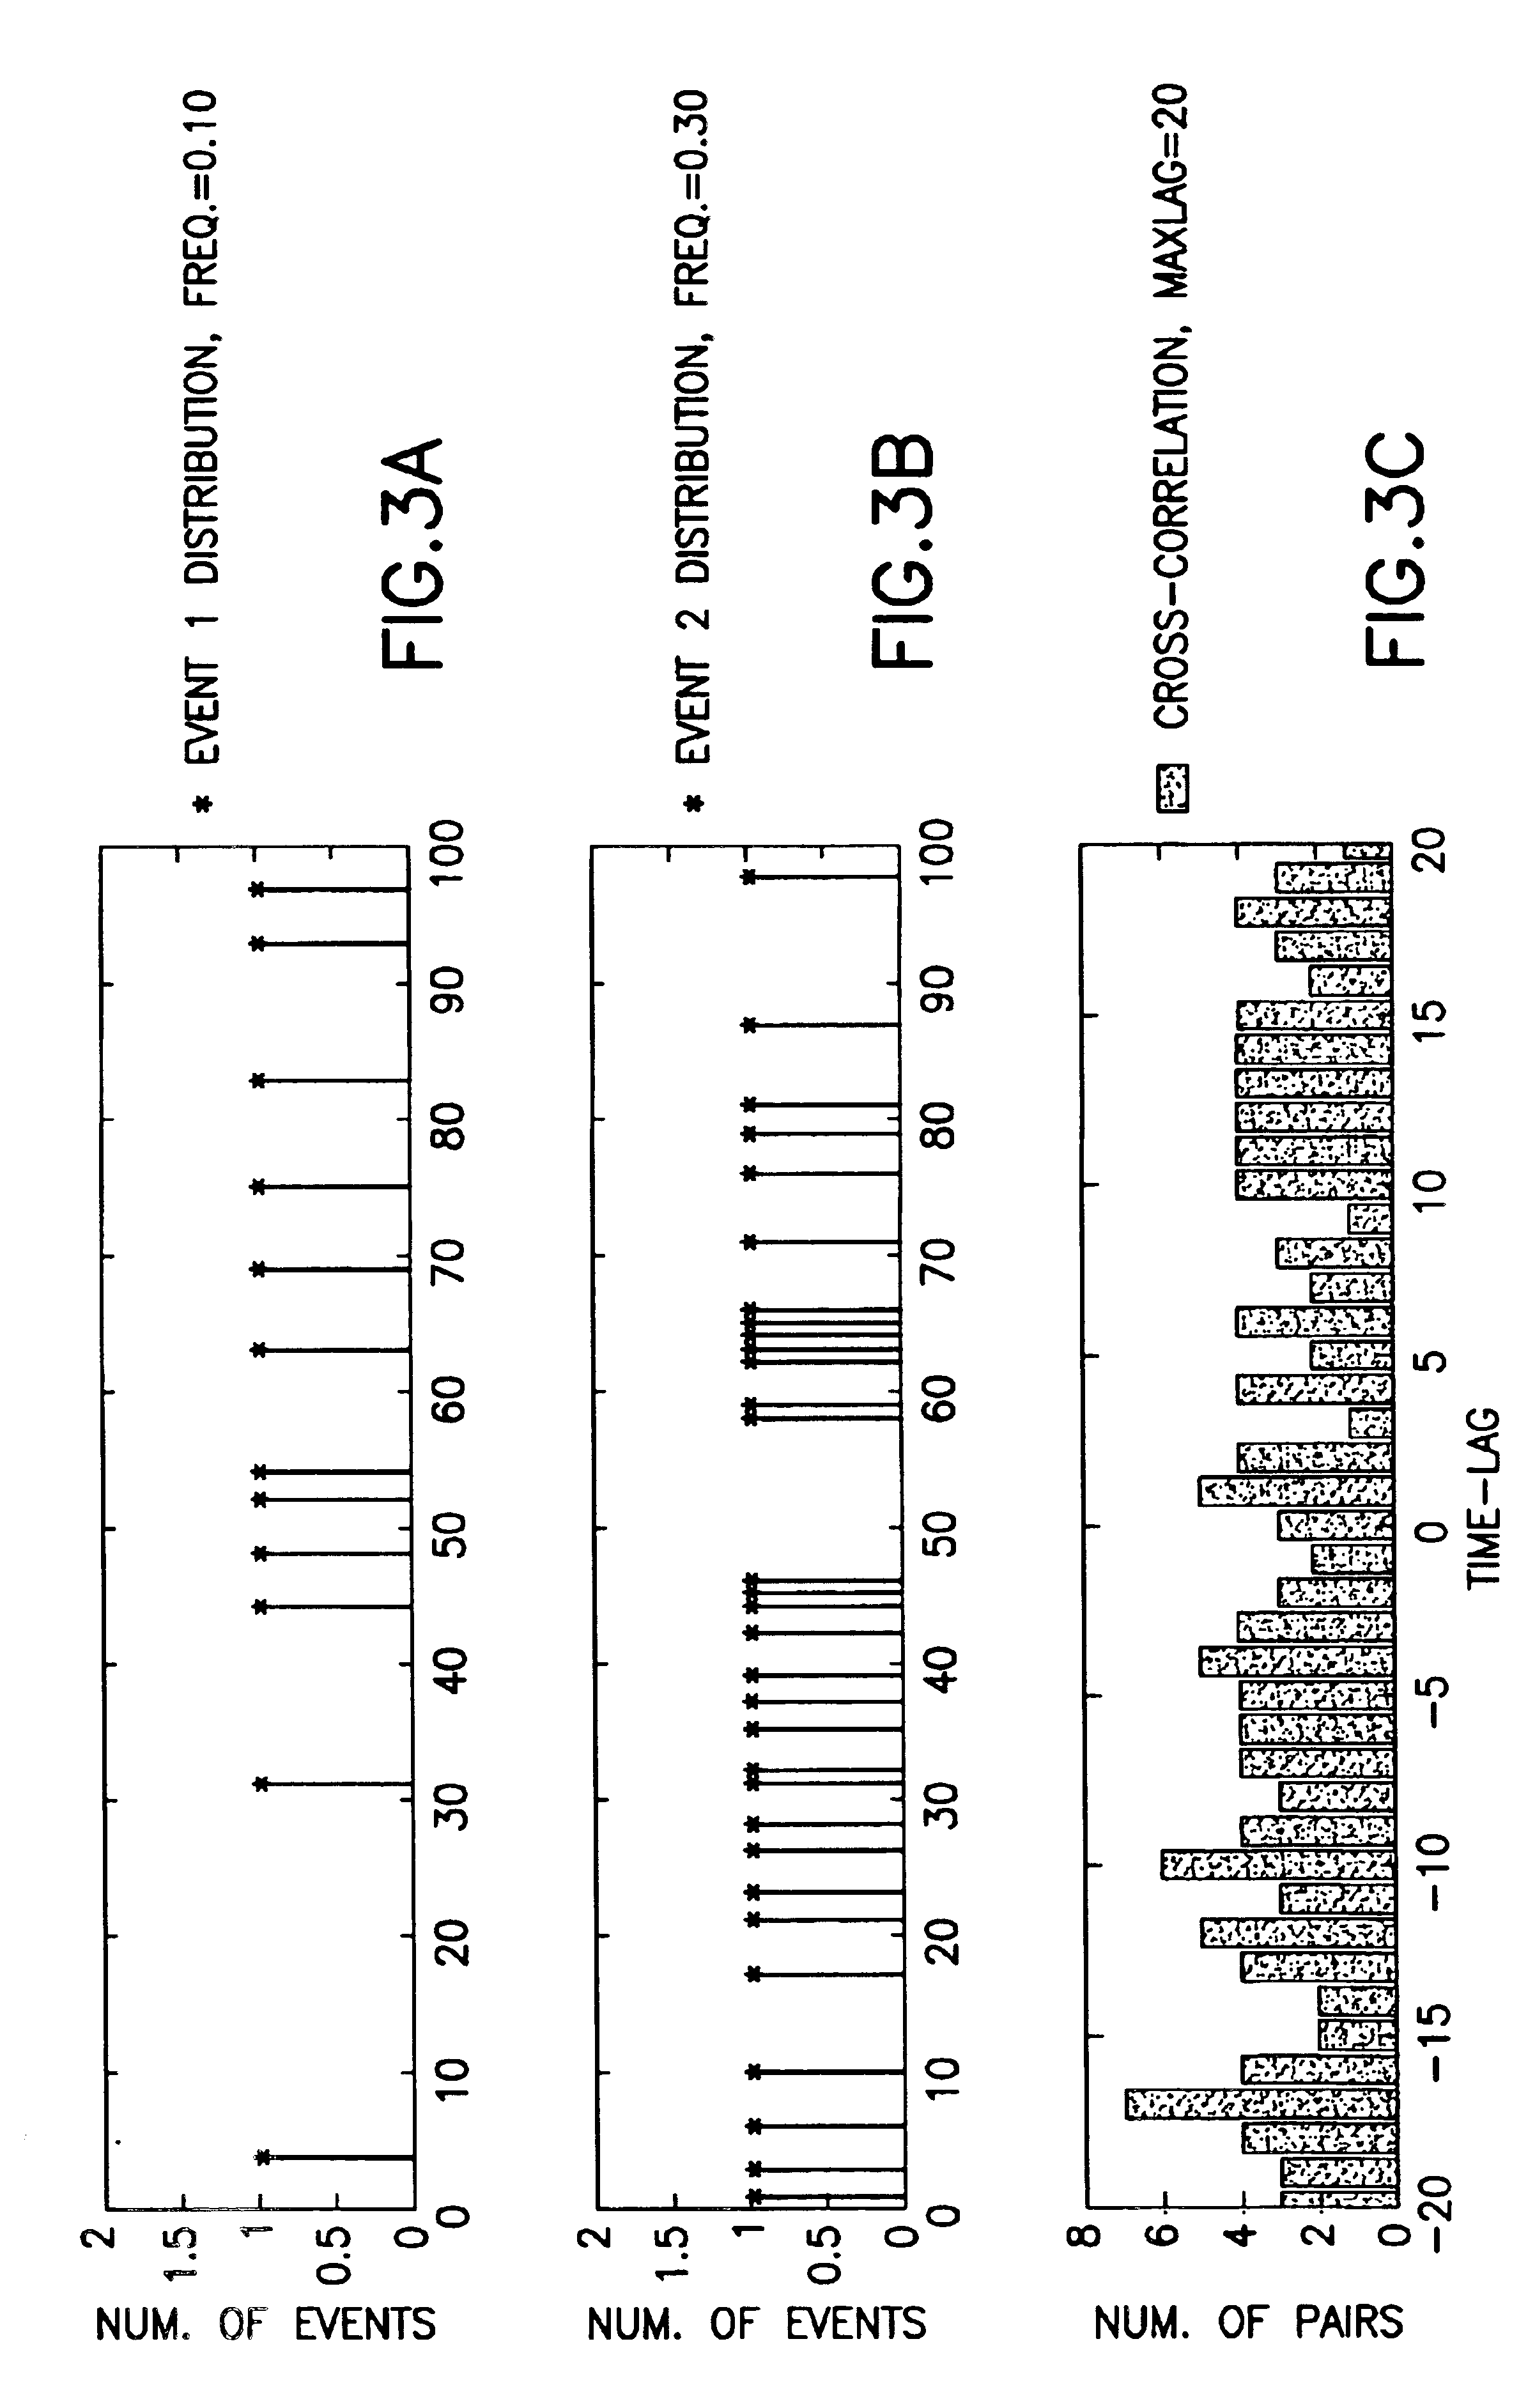 Method and system for finding a query-subset of events within a master-set of events